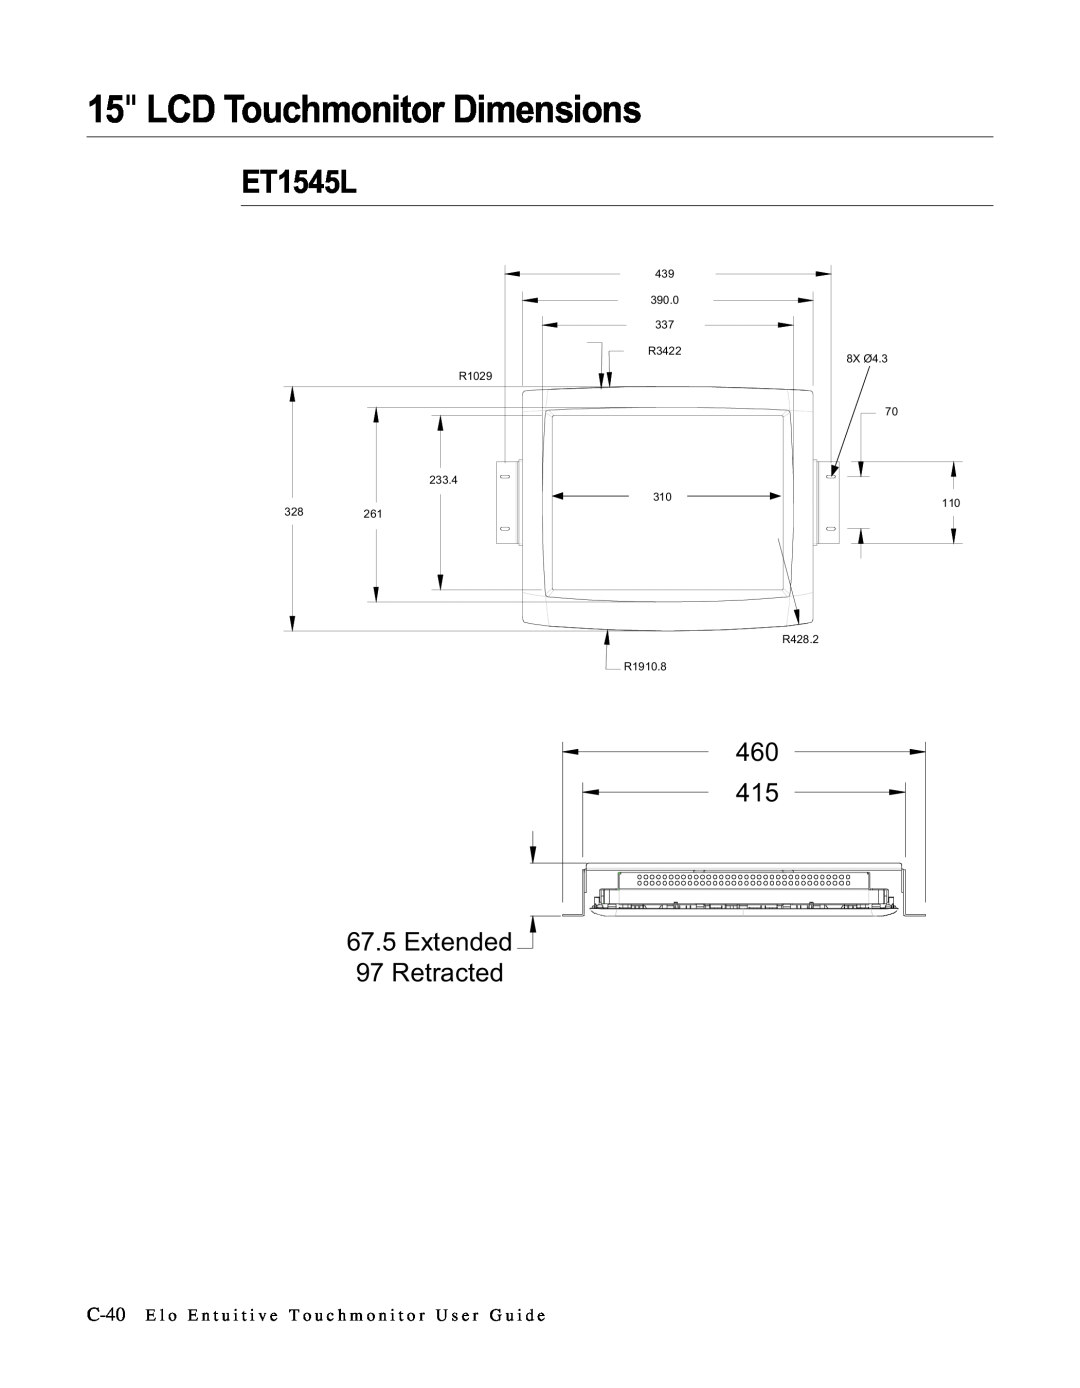 Elo TouchSystems manual LCD Touchmonitor Dimensions, ET1545L, + + + 